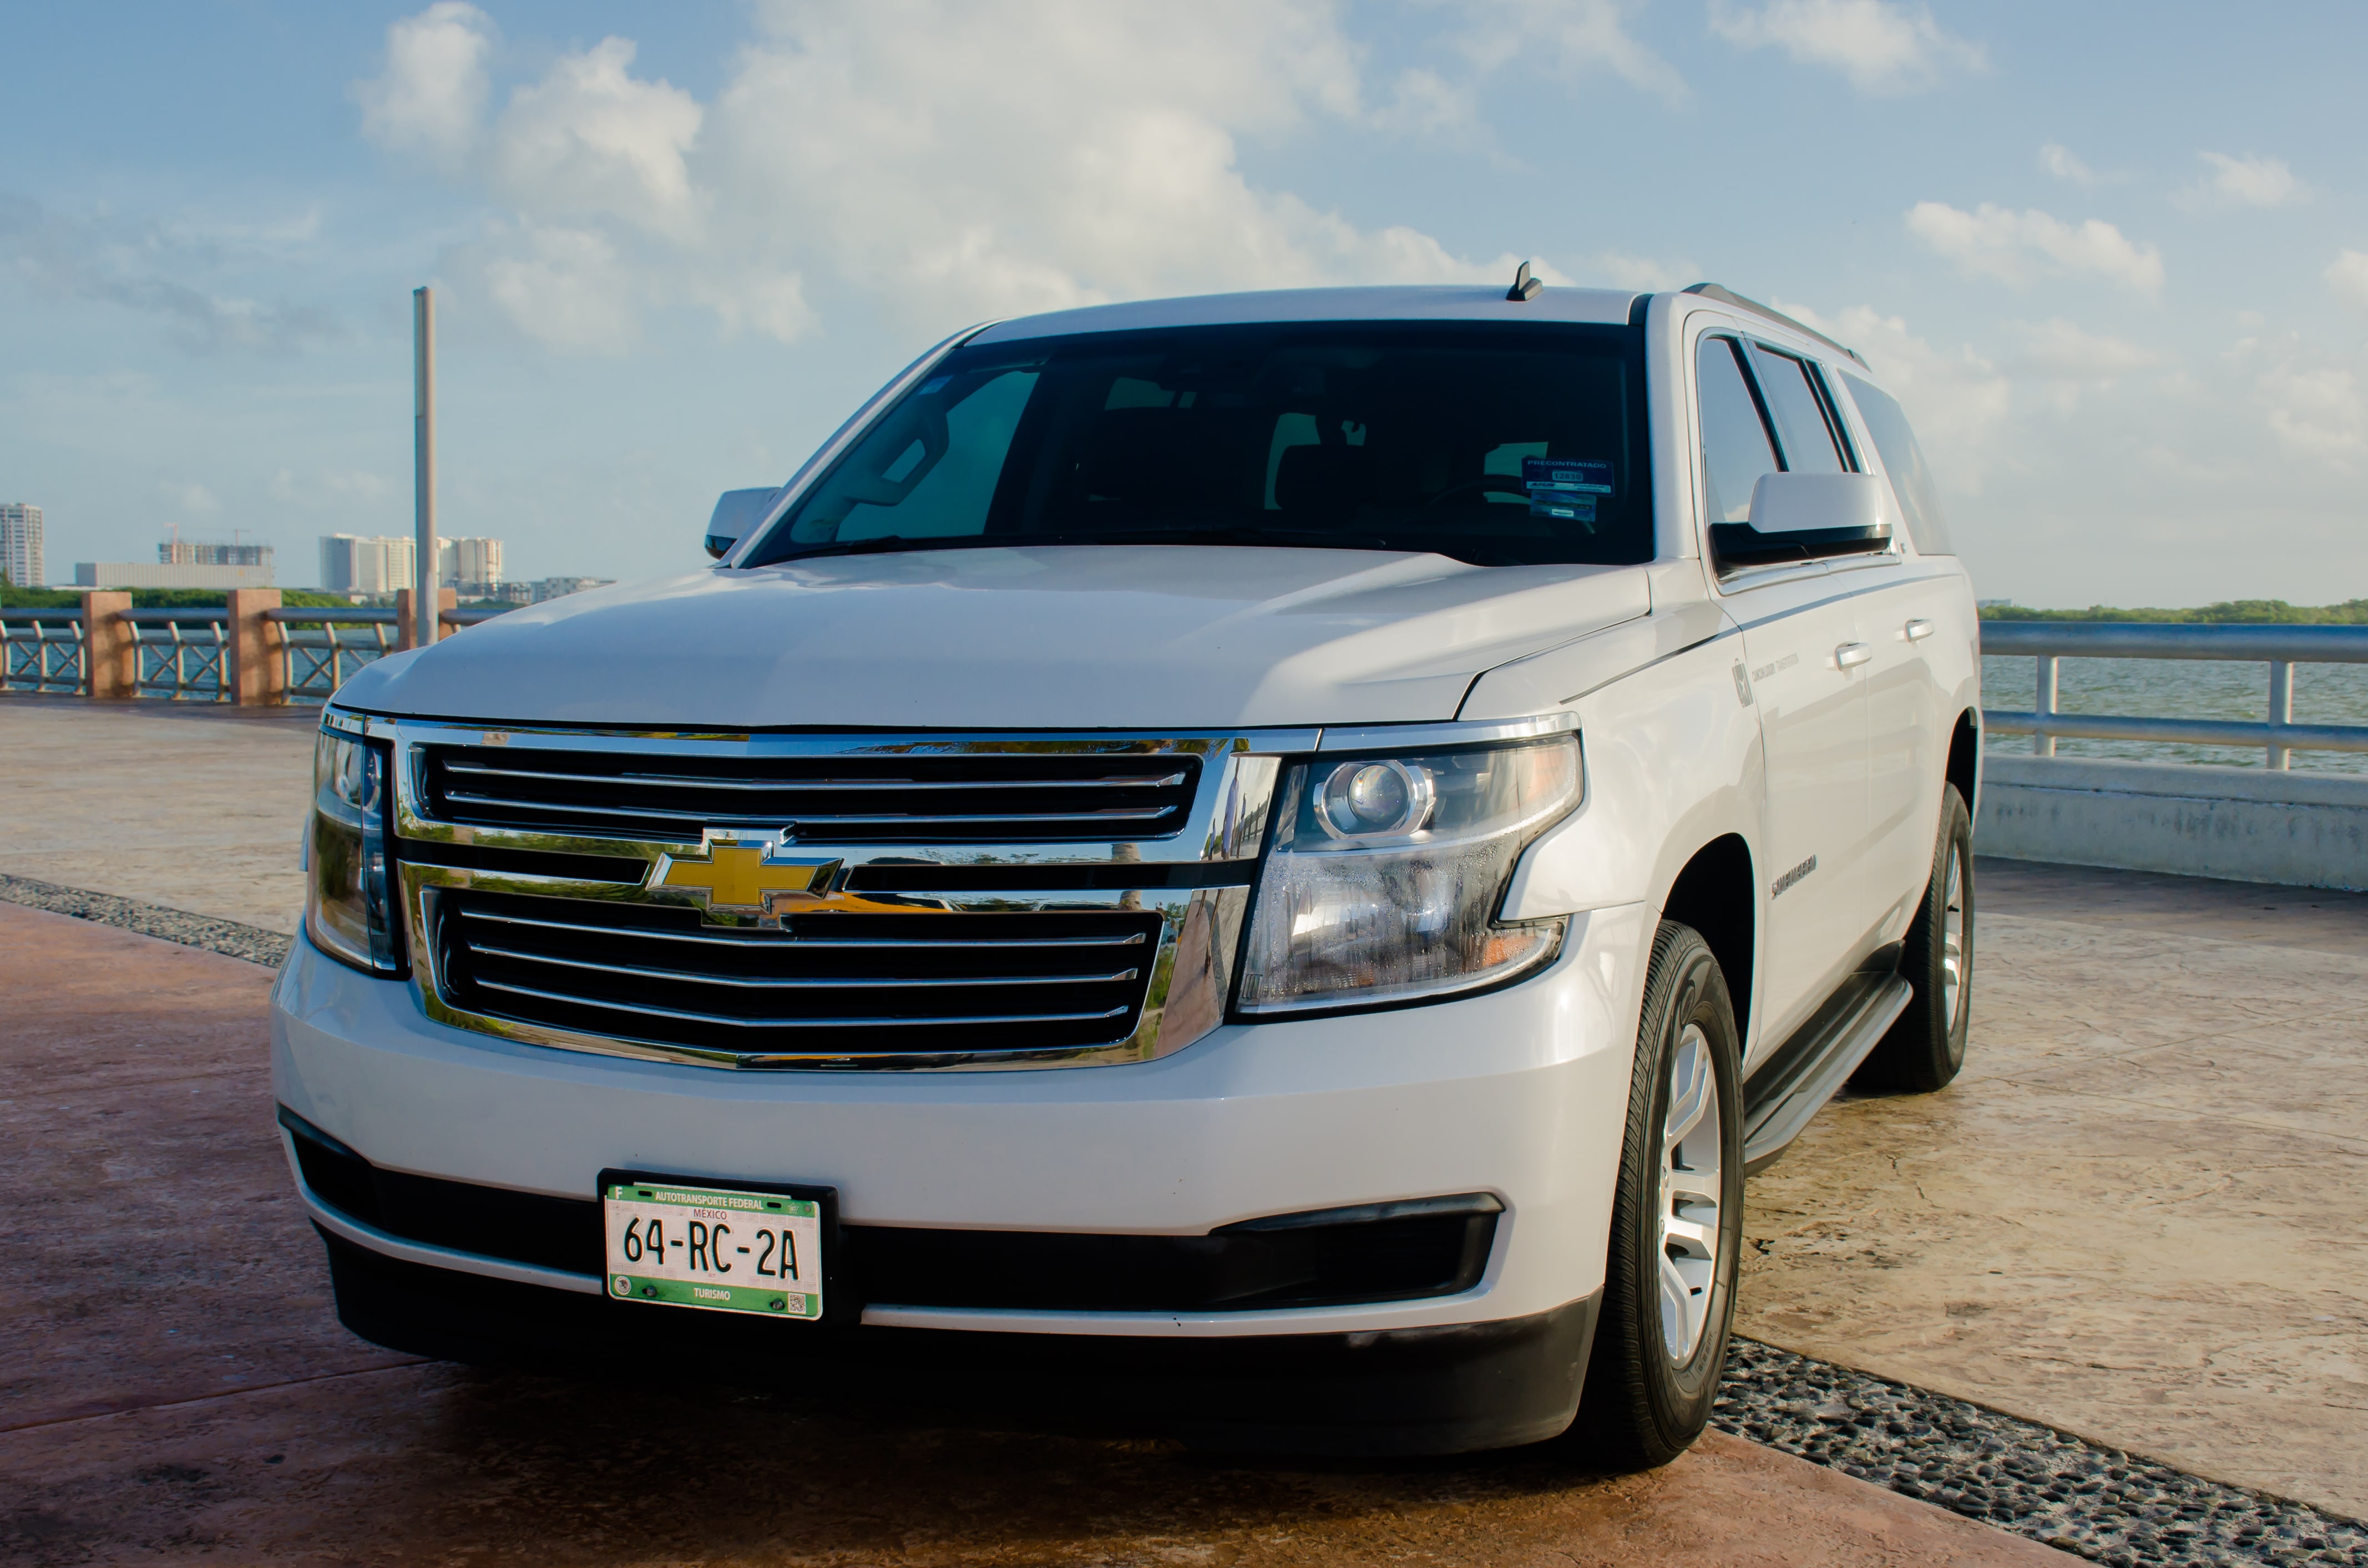 Branded Suburban used for luxury transportation services to Canopy by Hilton Cancun La Isla